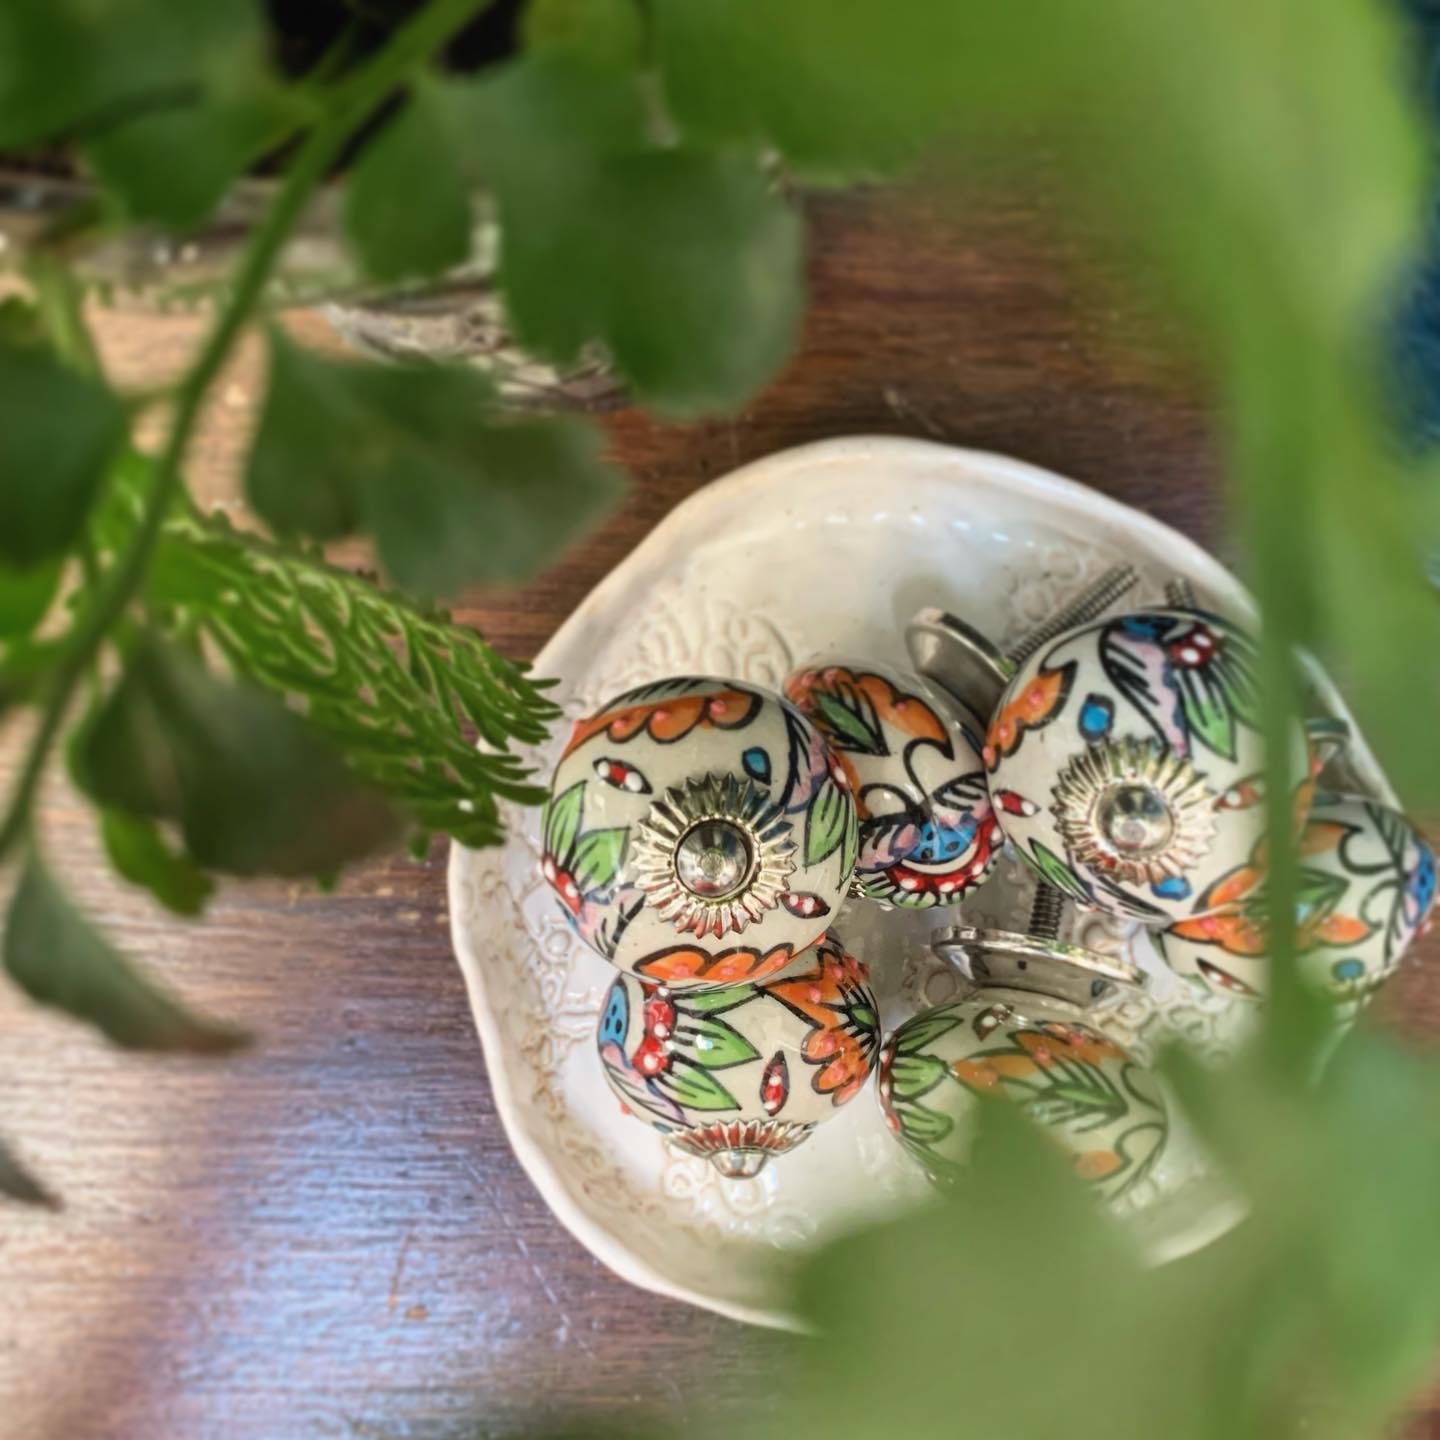 Gorgeous spring inspired knobs ready to adorn our newest batch of door wedges! We’re busy stocking up this week for the Bristol @thecraftandflea on Sunday! Our first real life market of 2021 ?Would love to see you there! You can purchase tickets through the @thecraftandflea website.